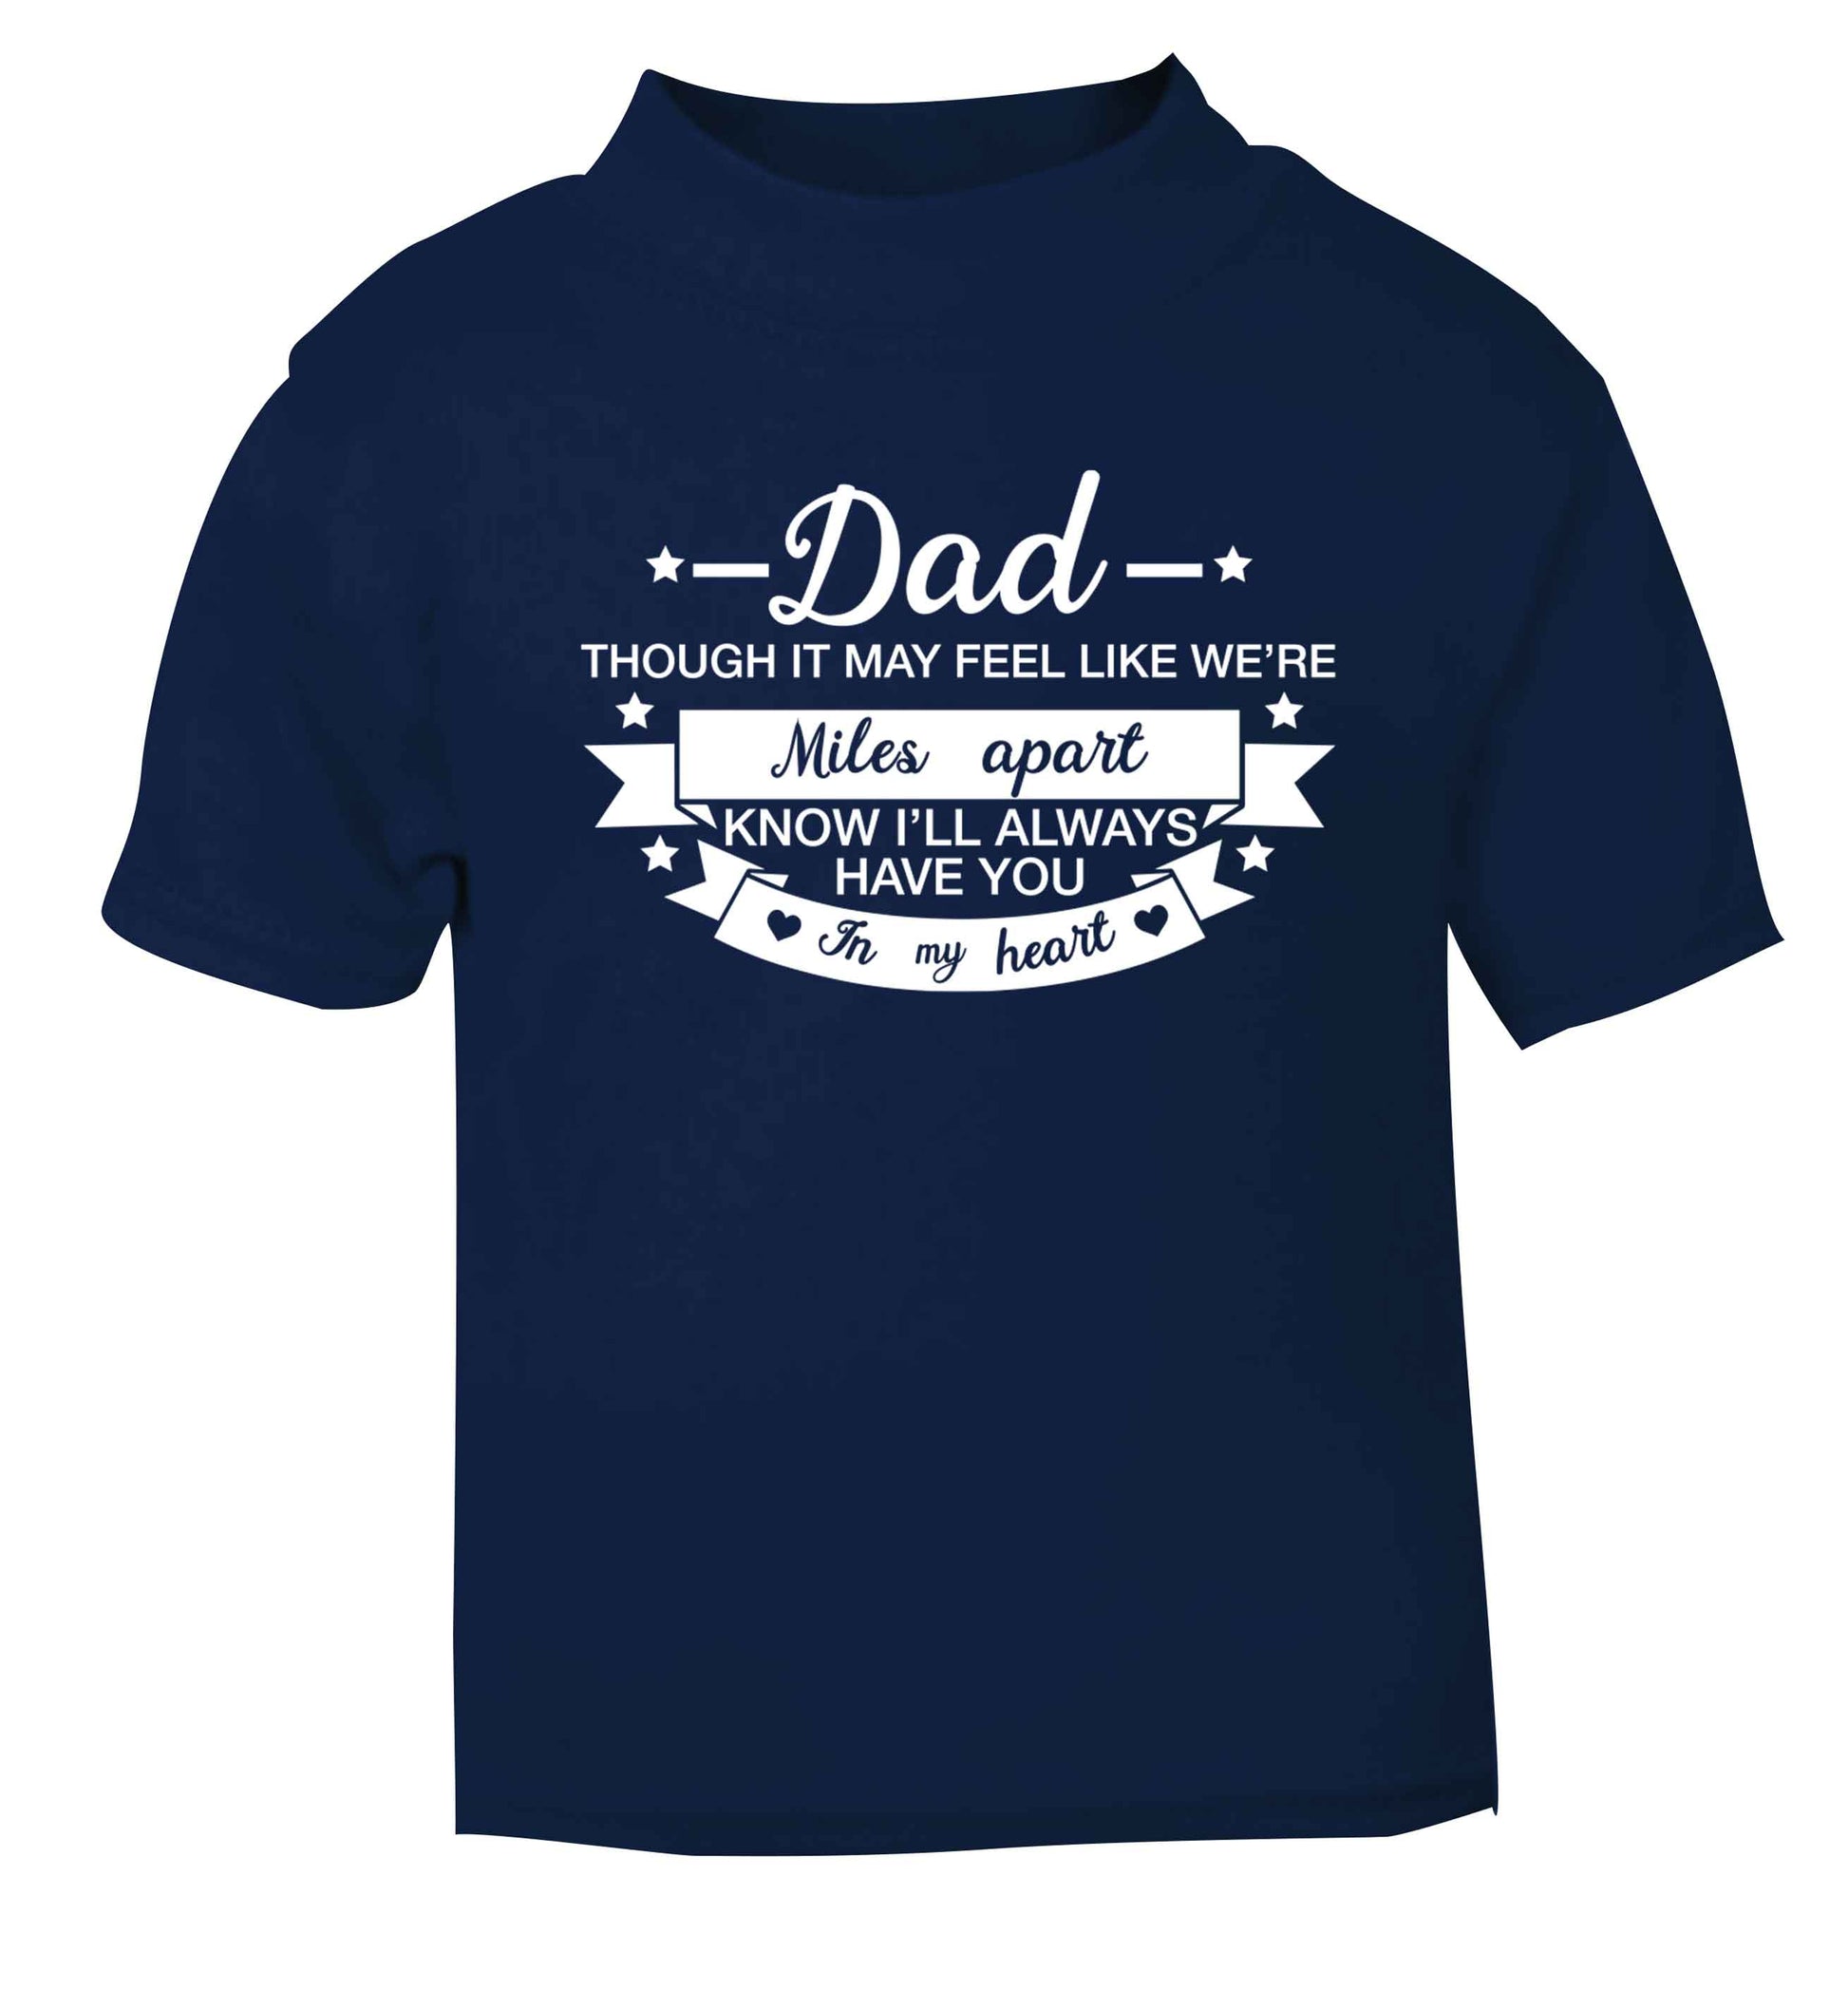 Dad though it may feel like we're miles apart know I'll always have you in my heart navy baby toddler Tshirt 2 Years